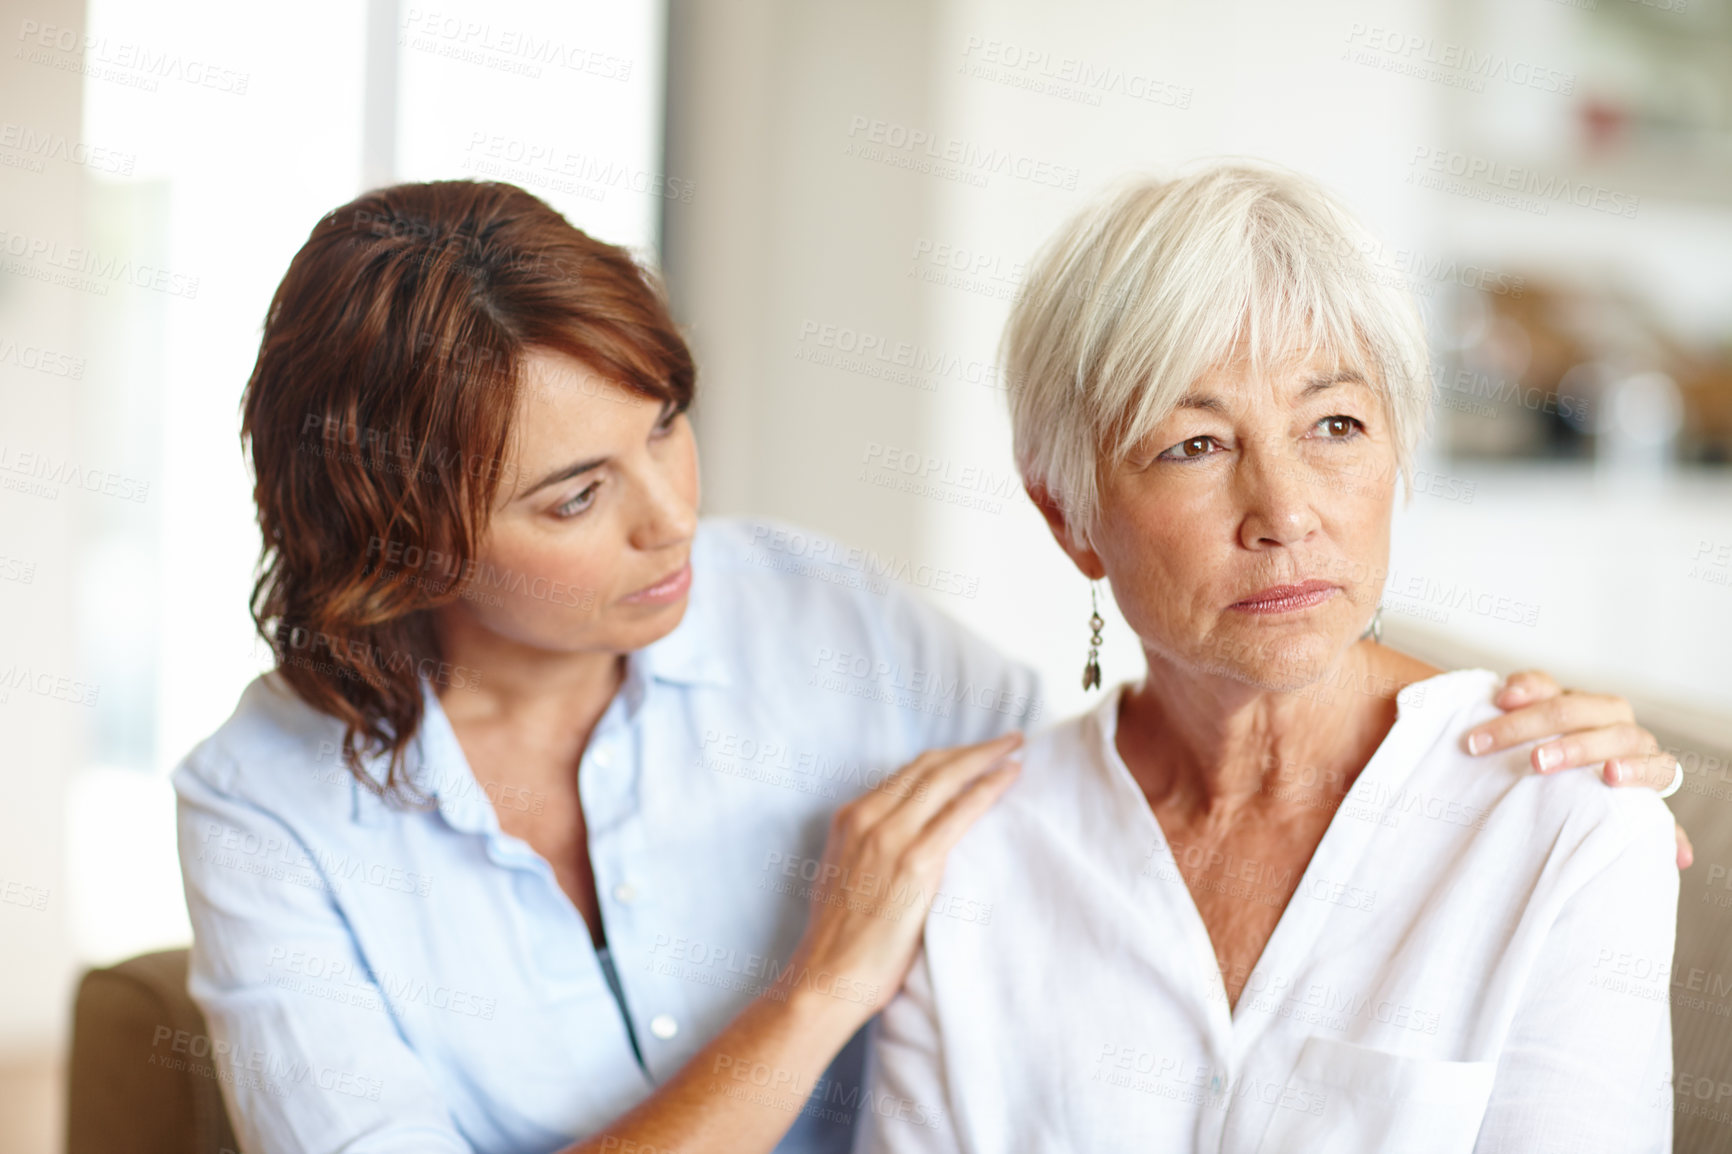 Buy stock photo Shot of a woman supporting her elderly mother through a difficult time